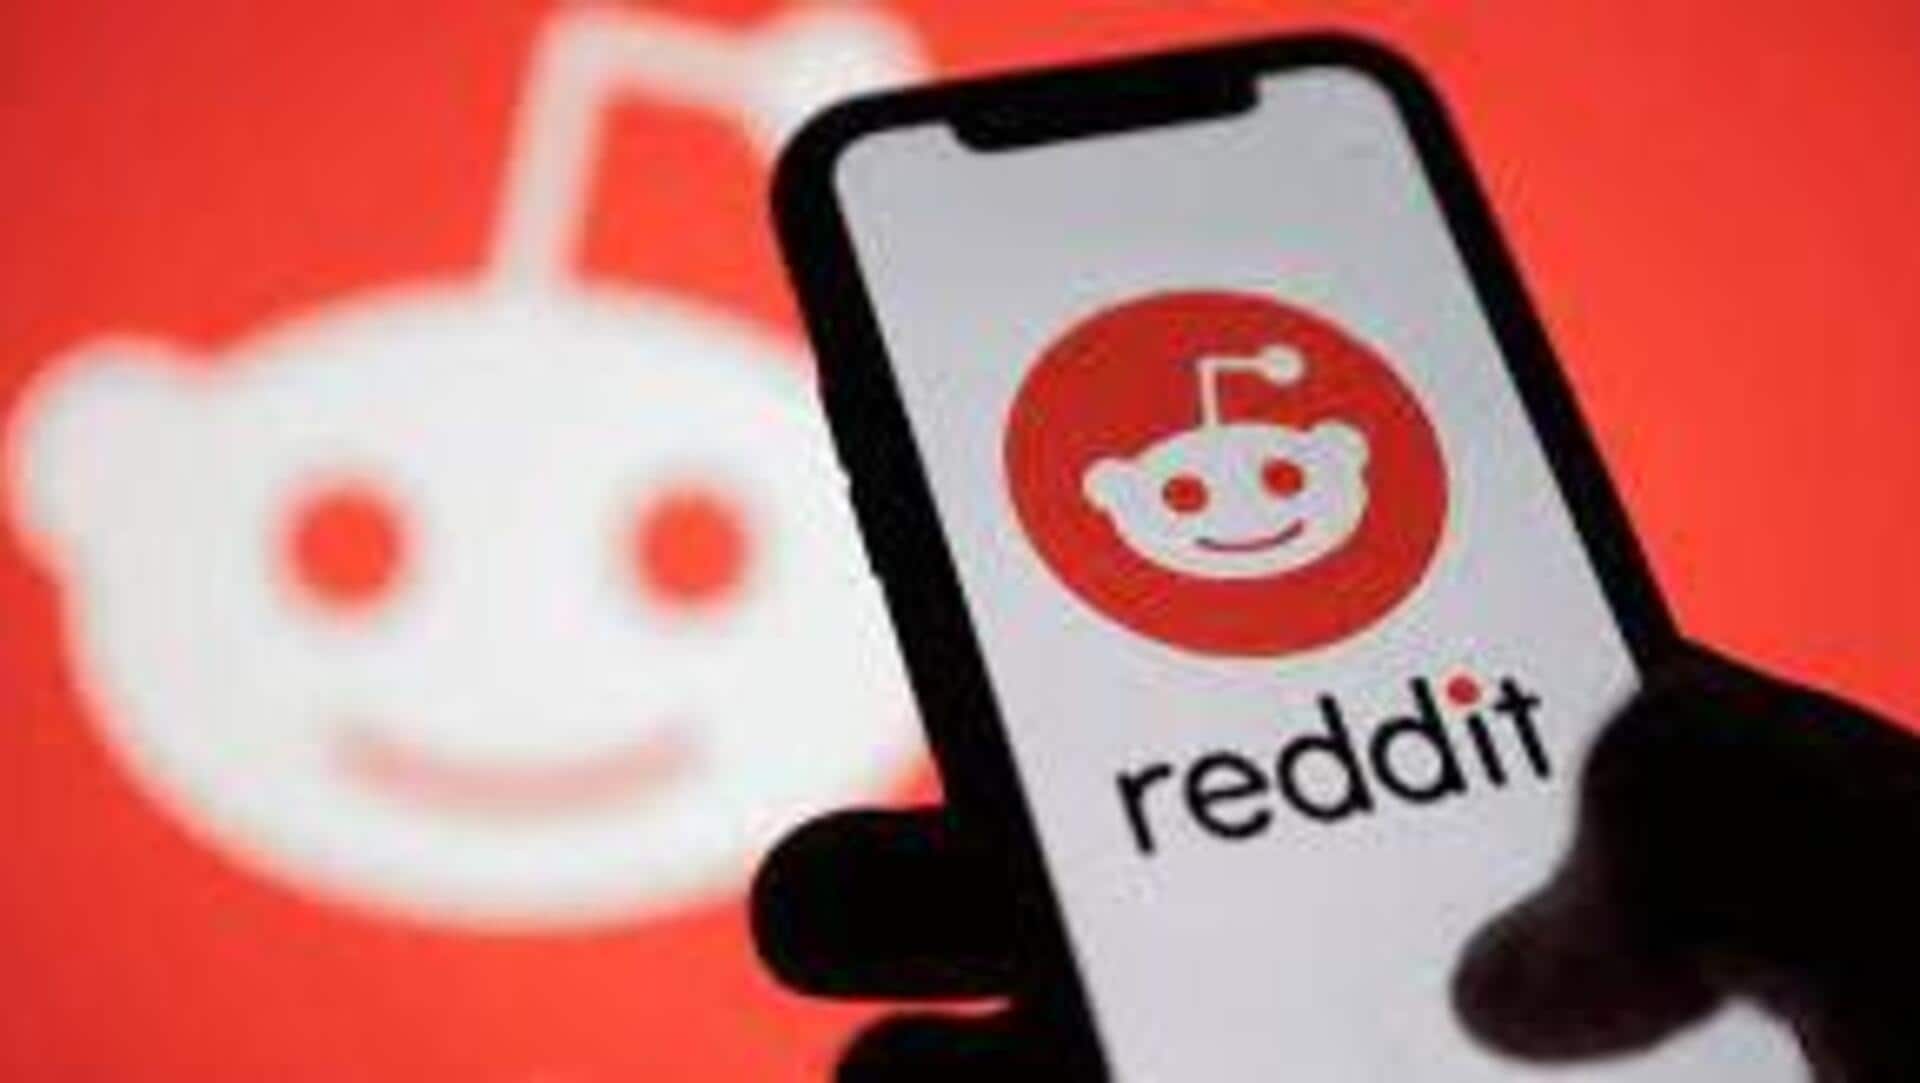 Reddit aims to raise nearly $750M through its IPO